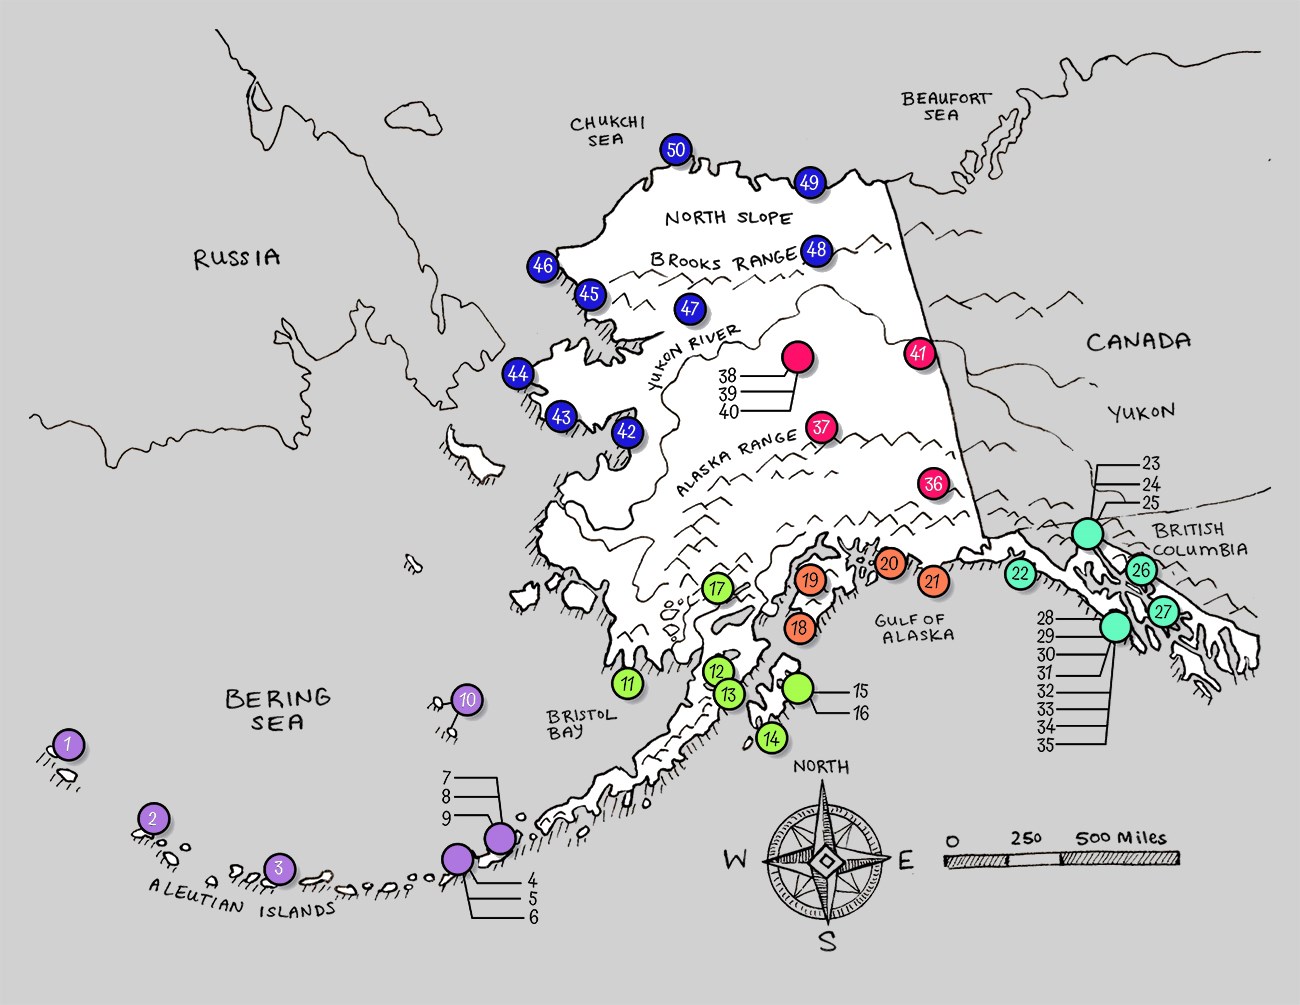 Hand drawn map showing the state of Alaska with 50 circles representing locations of National Historic Landmarks.